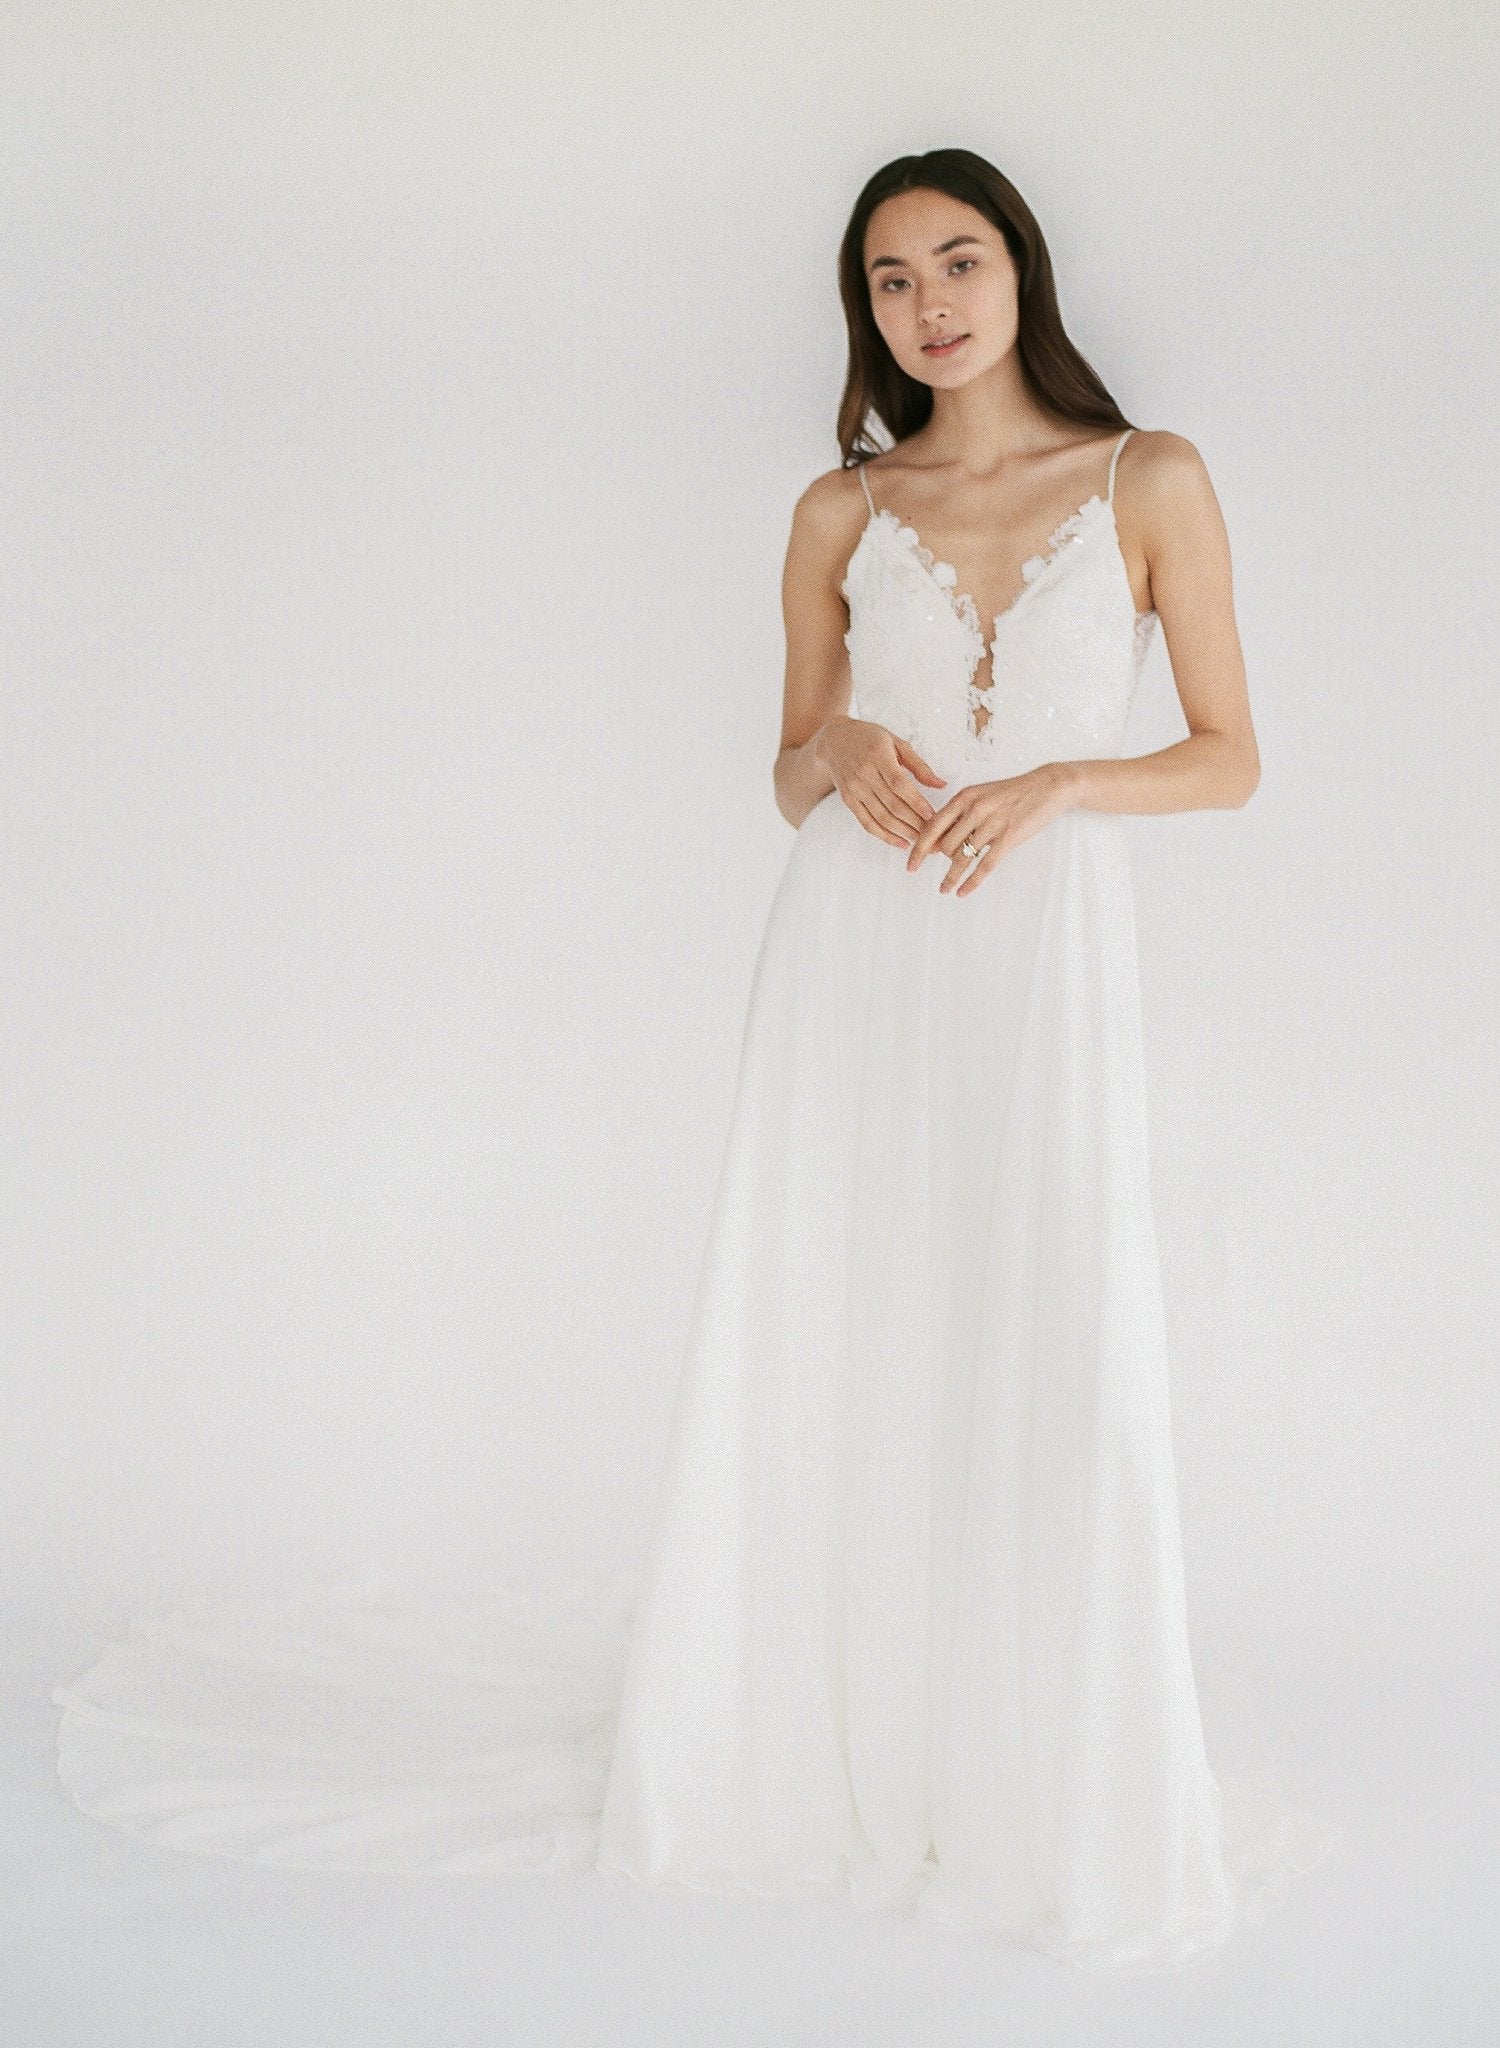 Flowy beach wedding dress with lace appliqué, a low back, and plunging neckline